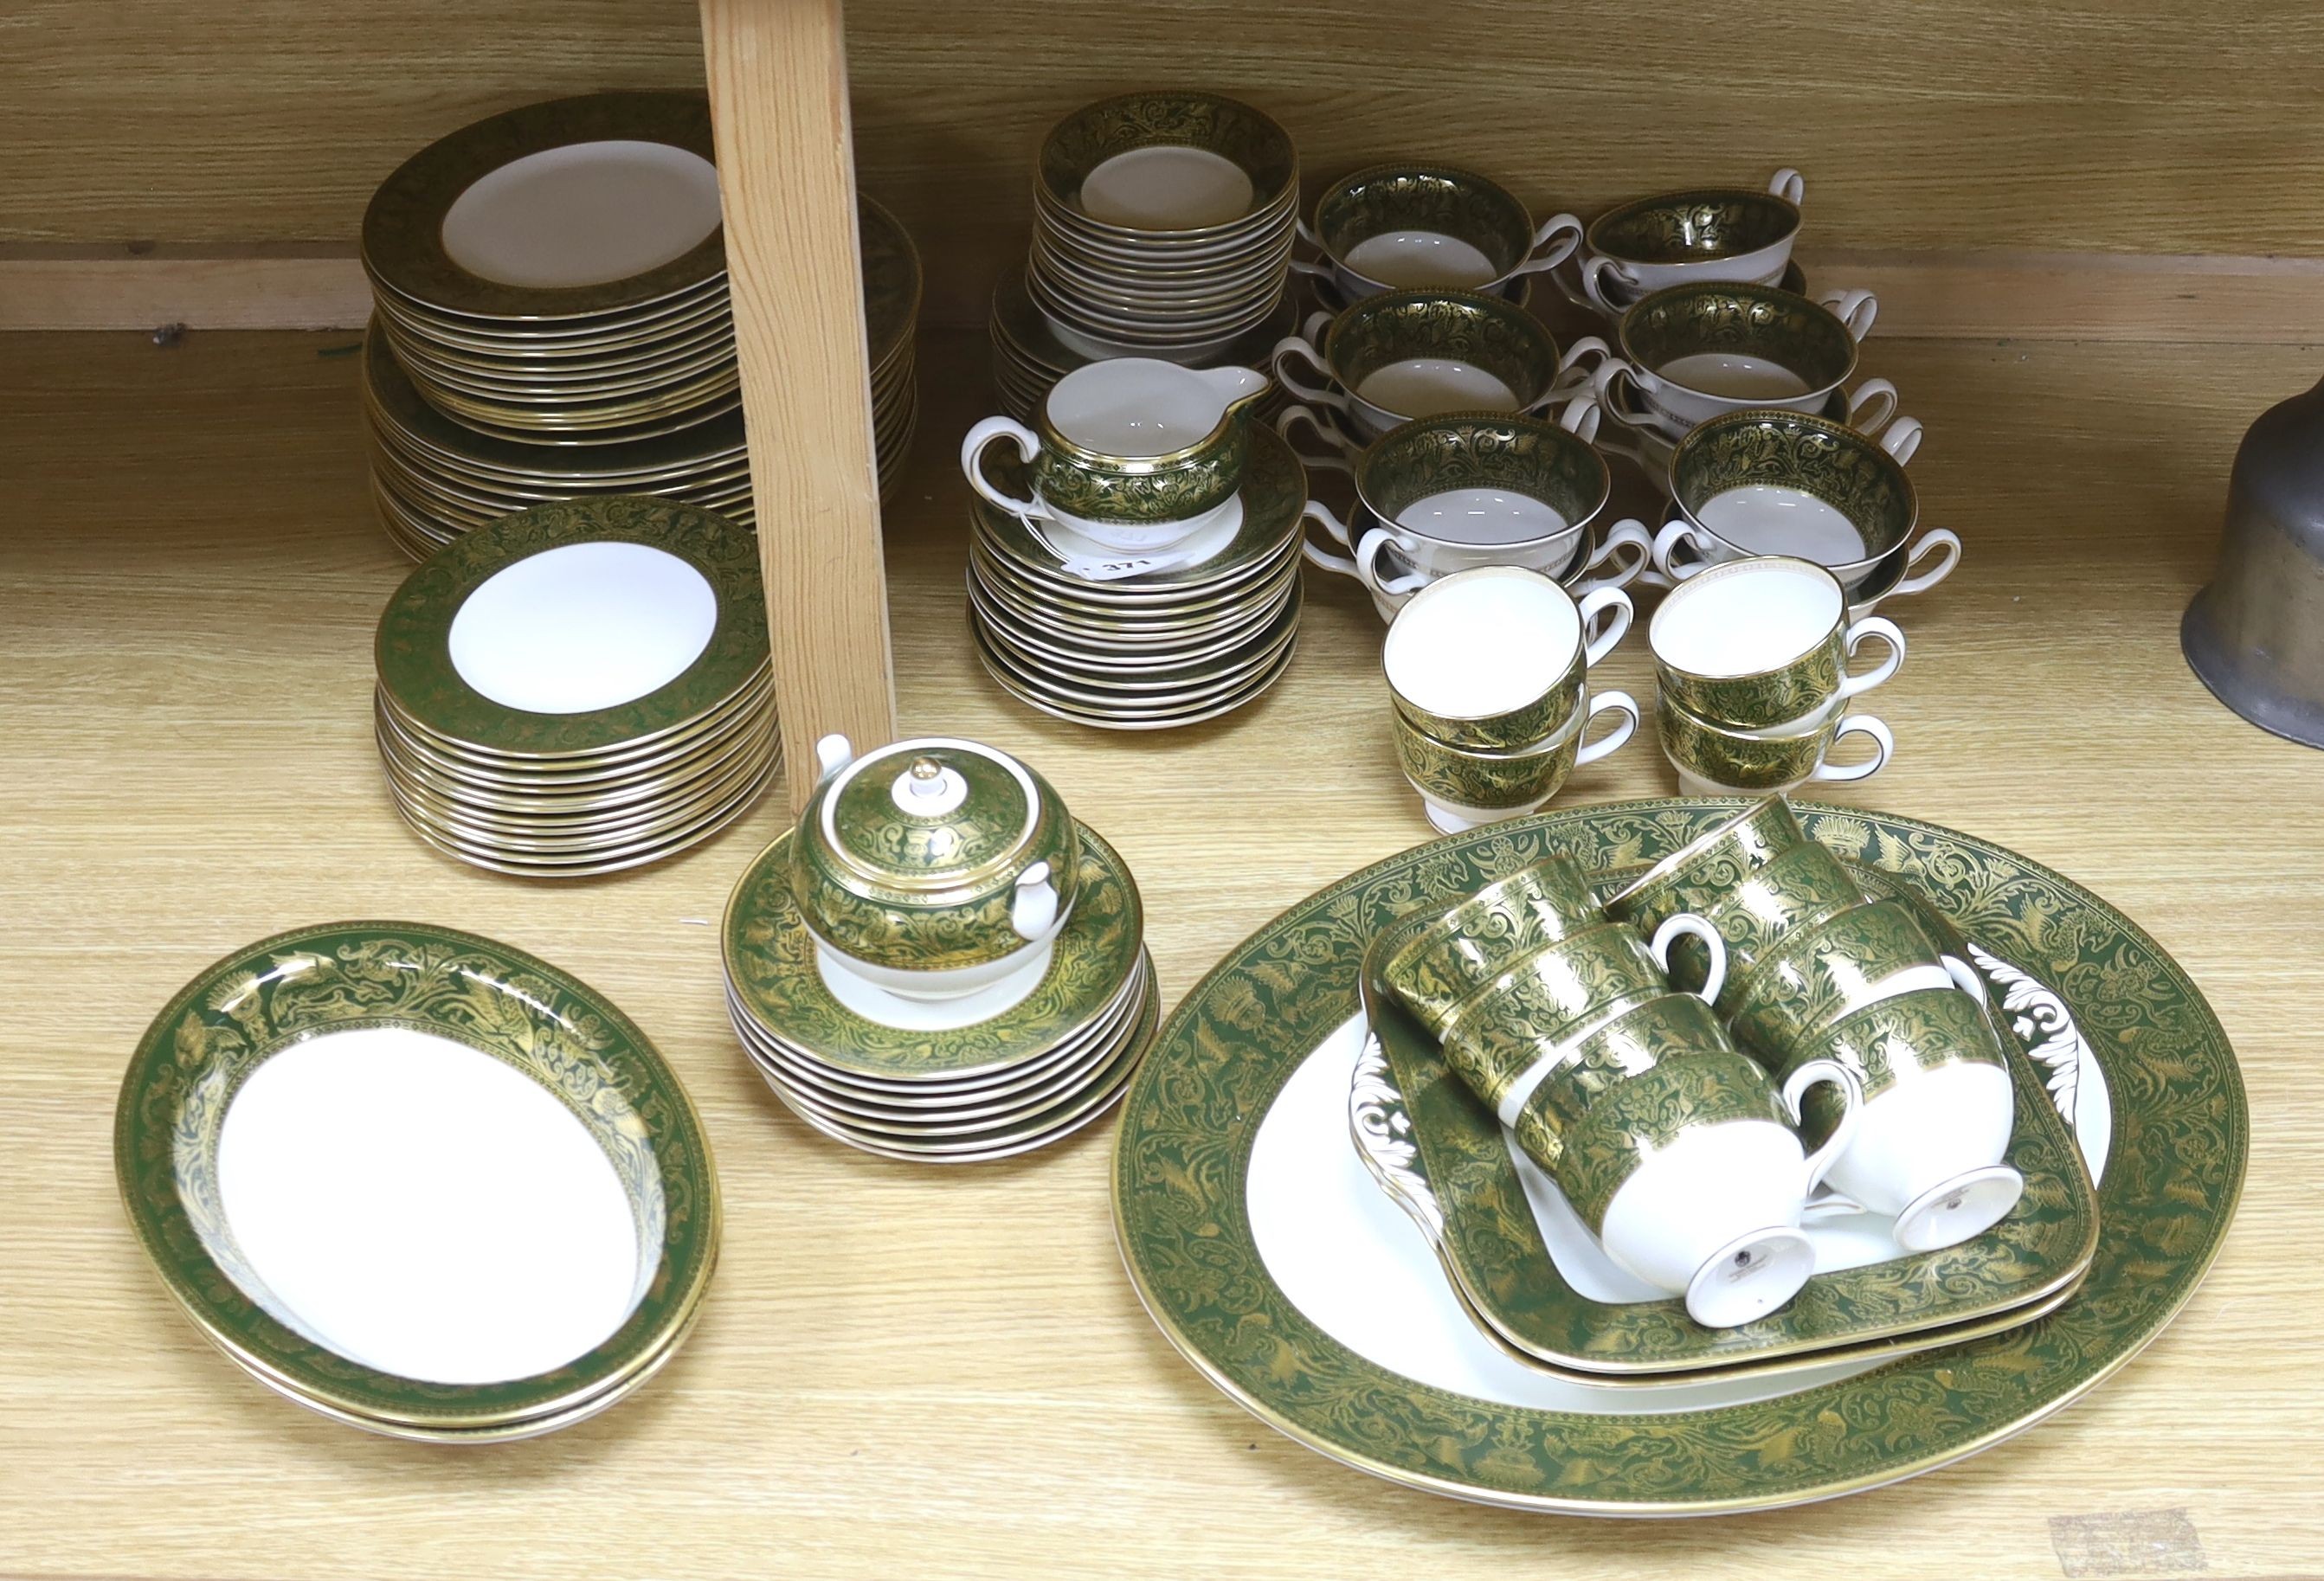 A Wedgwood Green Florentine pattern bone china part dinner and tea service, 110 pieces for a 12 place setting